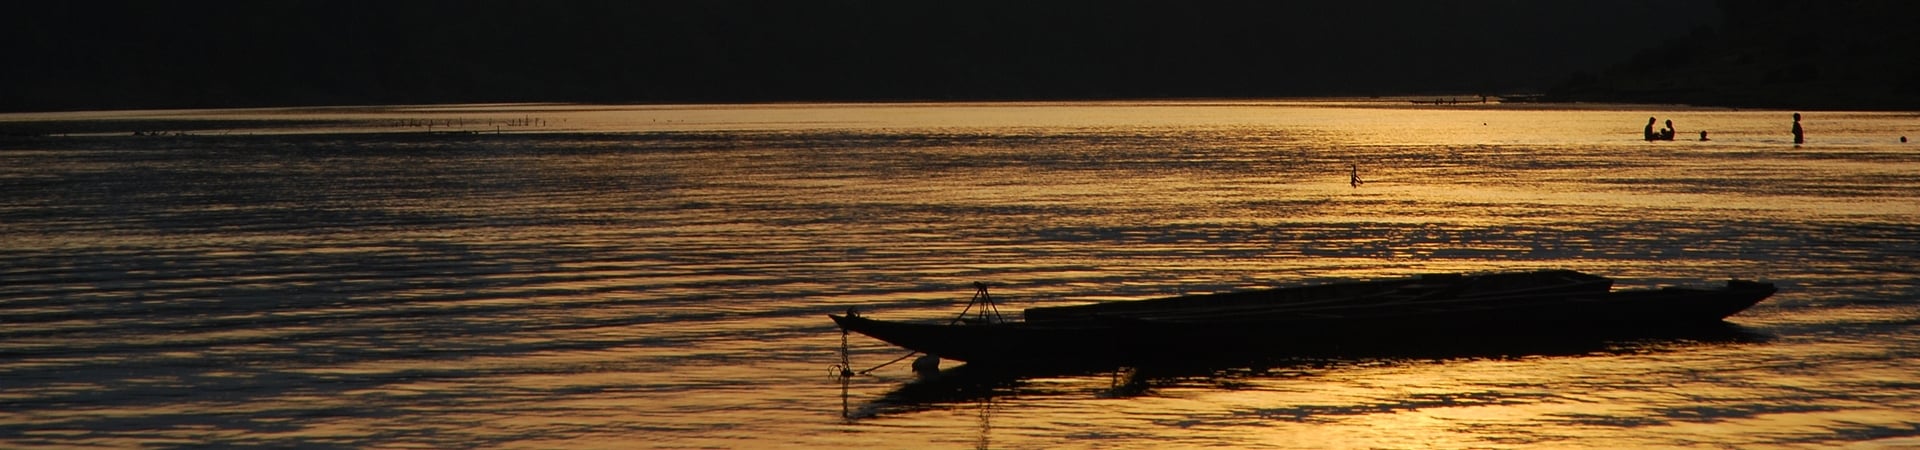 Image of The Mighty Mekong, Asia’s Lifeblood